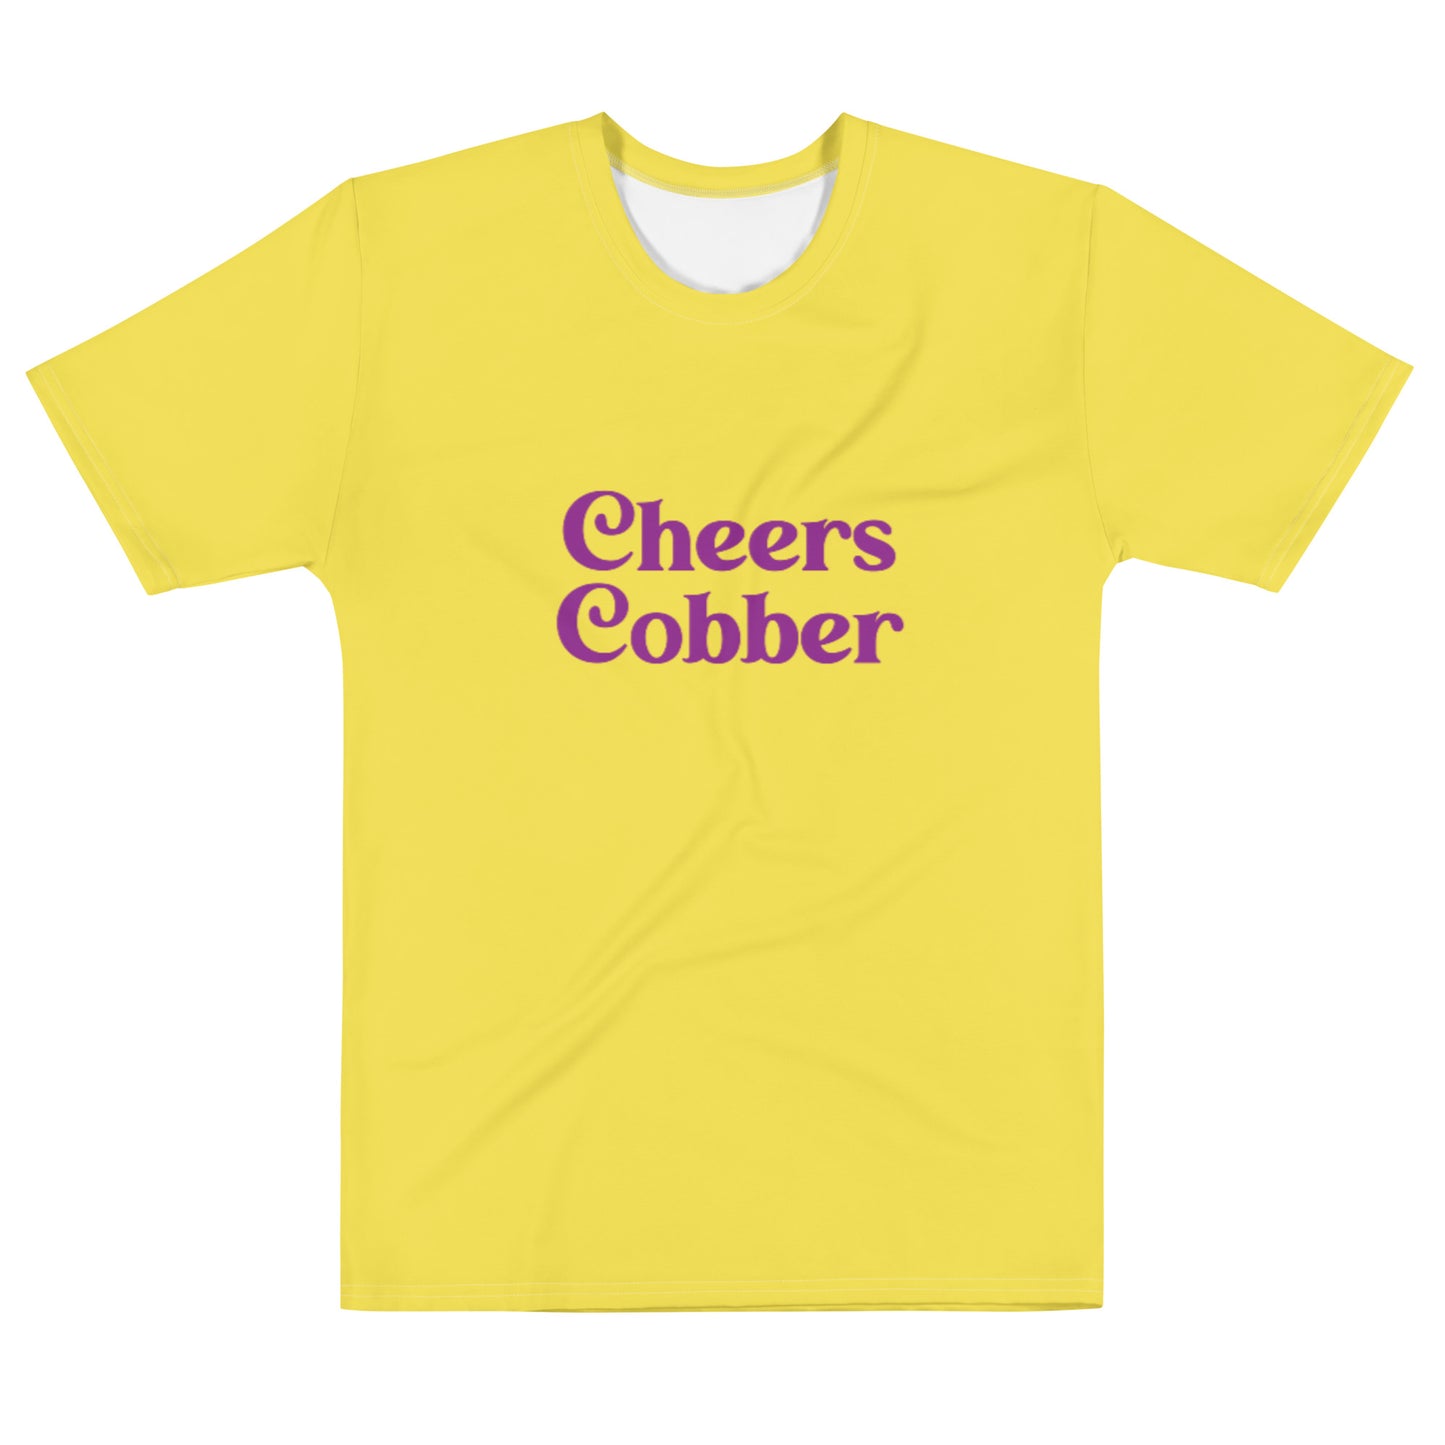 Cheers Cobber - Sustainably Made Men's Short Sleeve Tee